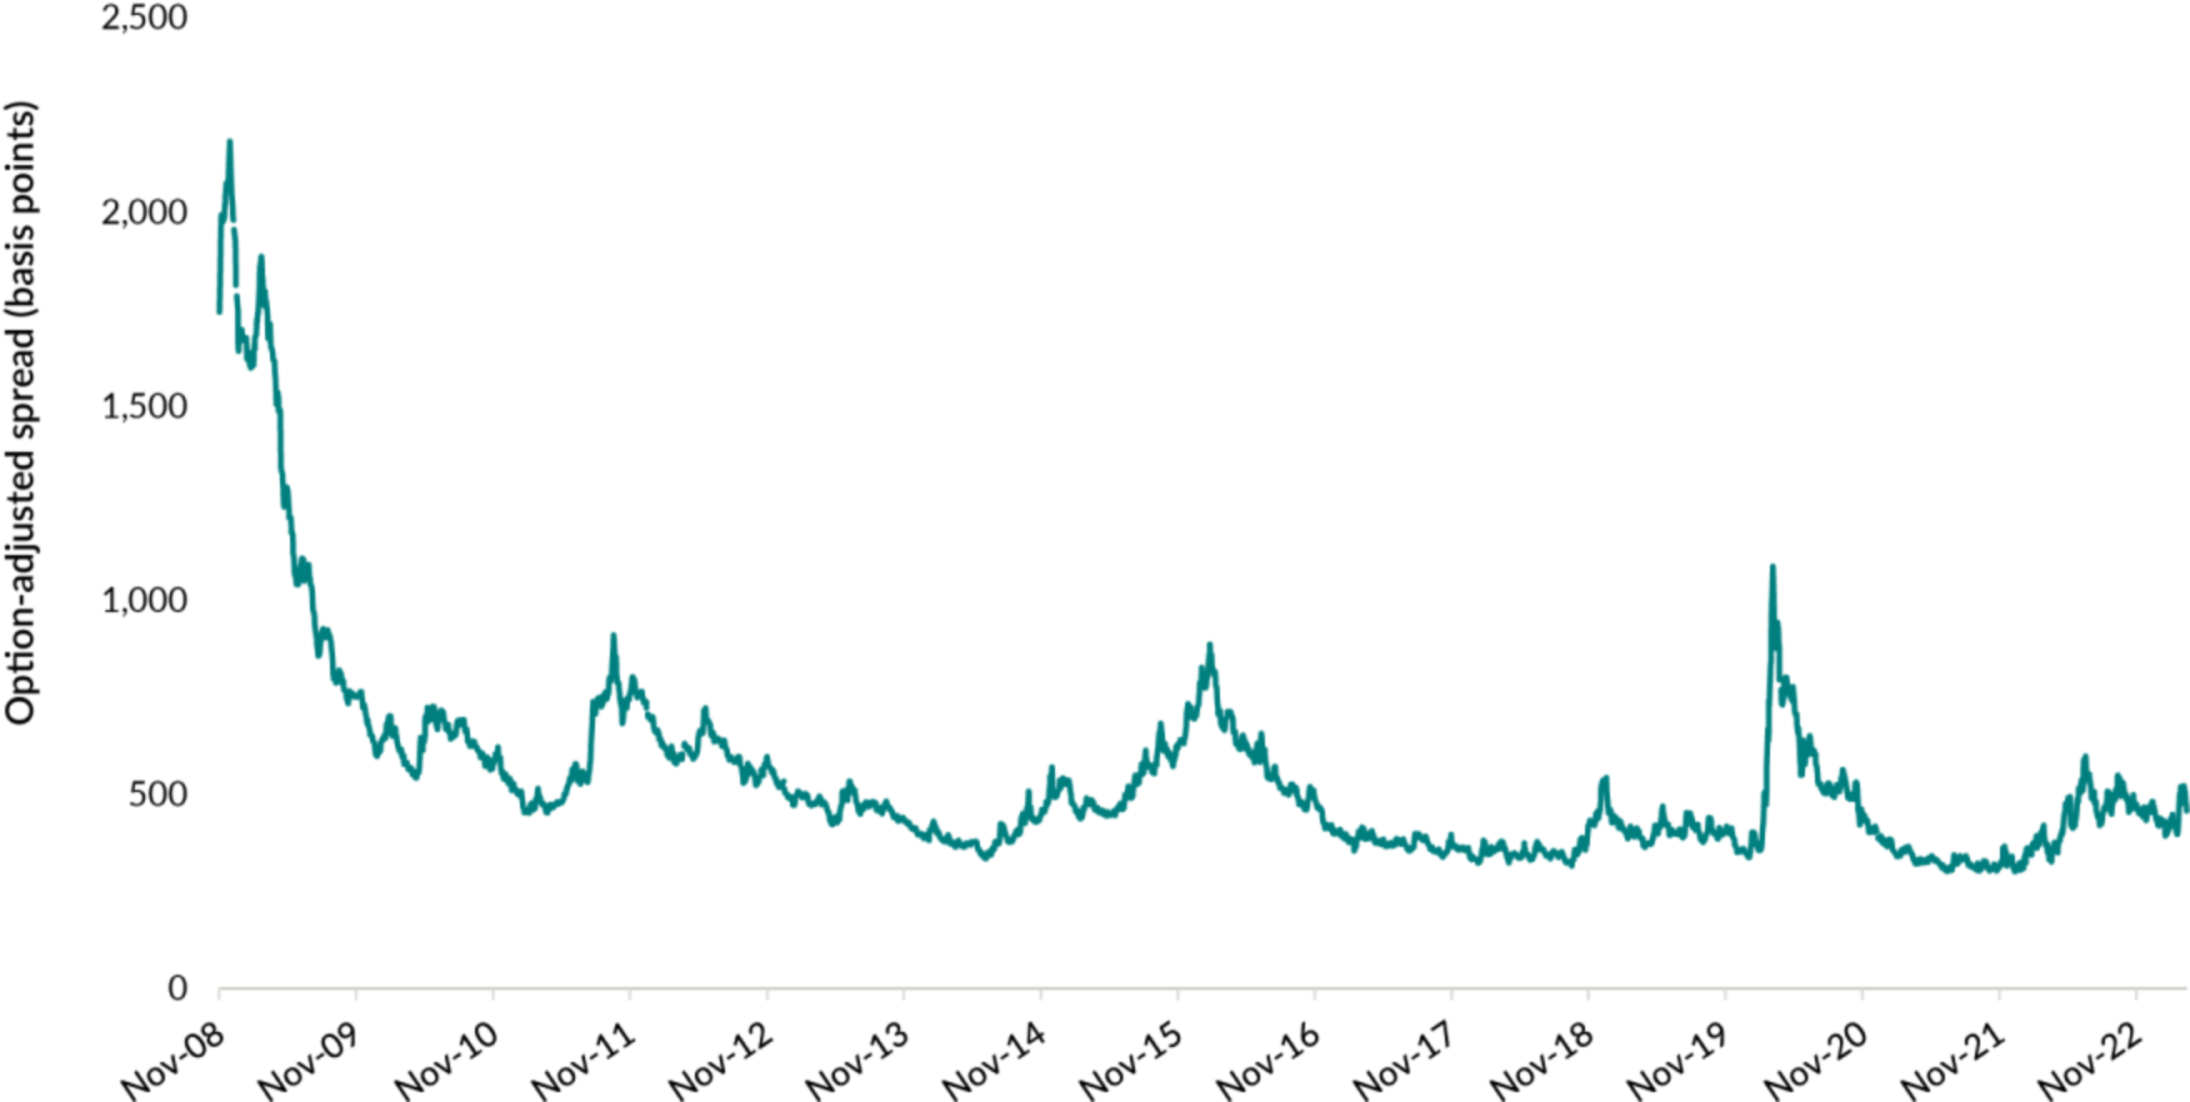 A line chart showing the ICE BofA US High Yield II Index option-adjusted spread between November 17, 2008 and March 31, 2023. After starting at around 1700 basis points, the spread peaked at about 2,200 basis points in 2009, before slowly decline to less than 400 in 2019. It rose to over 1,100 in March 2020 due to Covid, but ended the period at around 500 basis points.